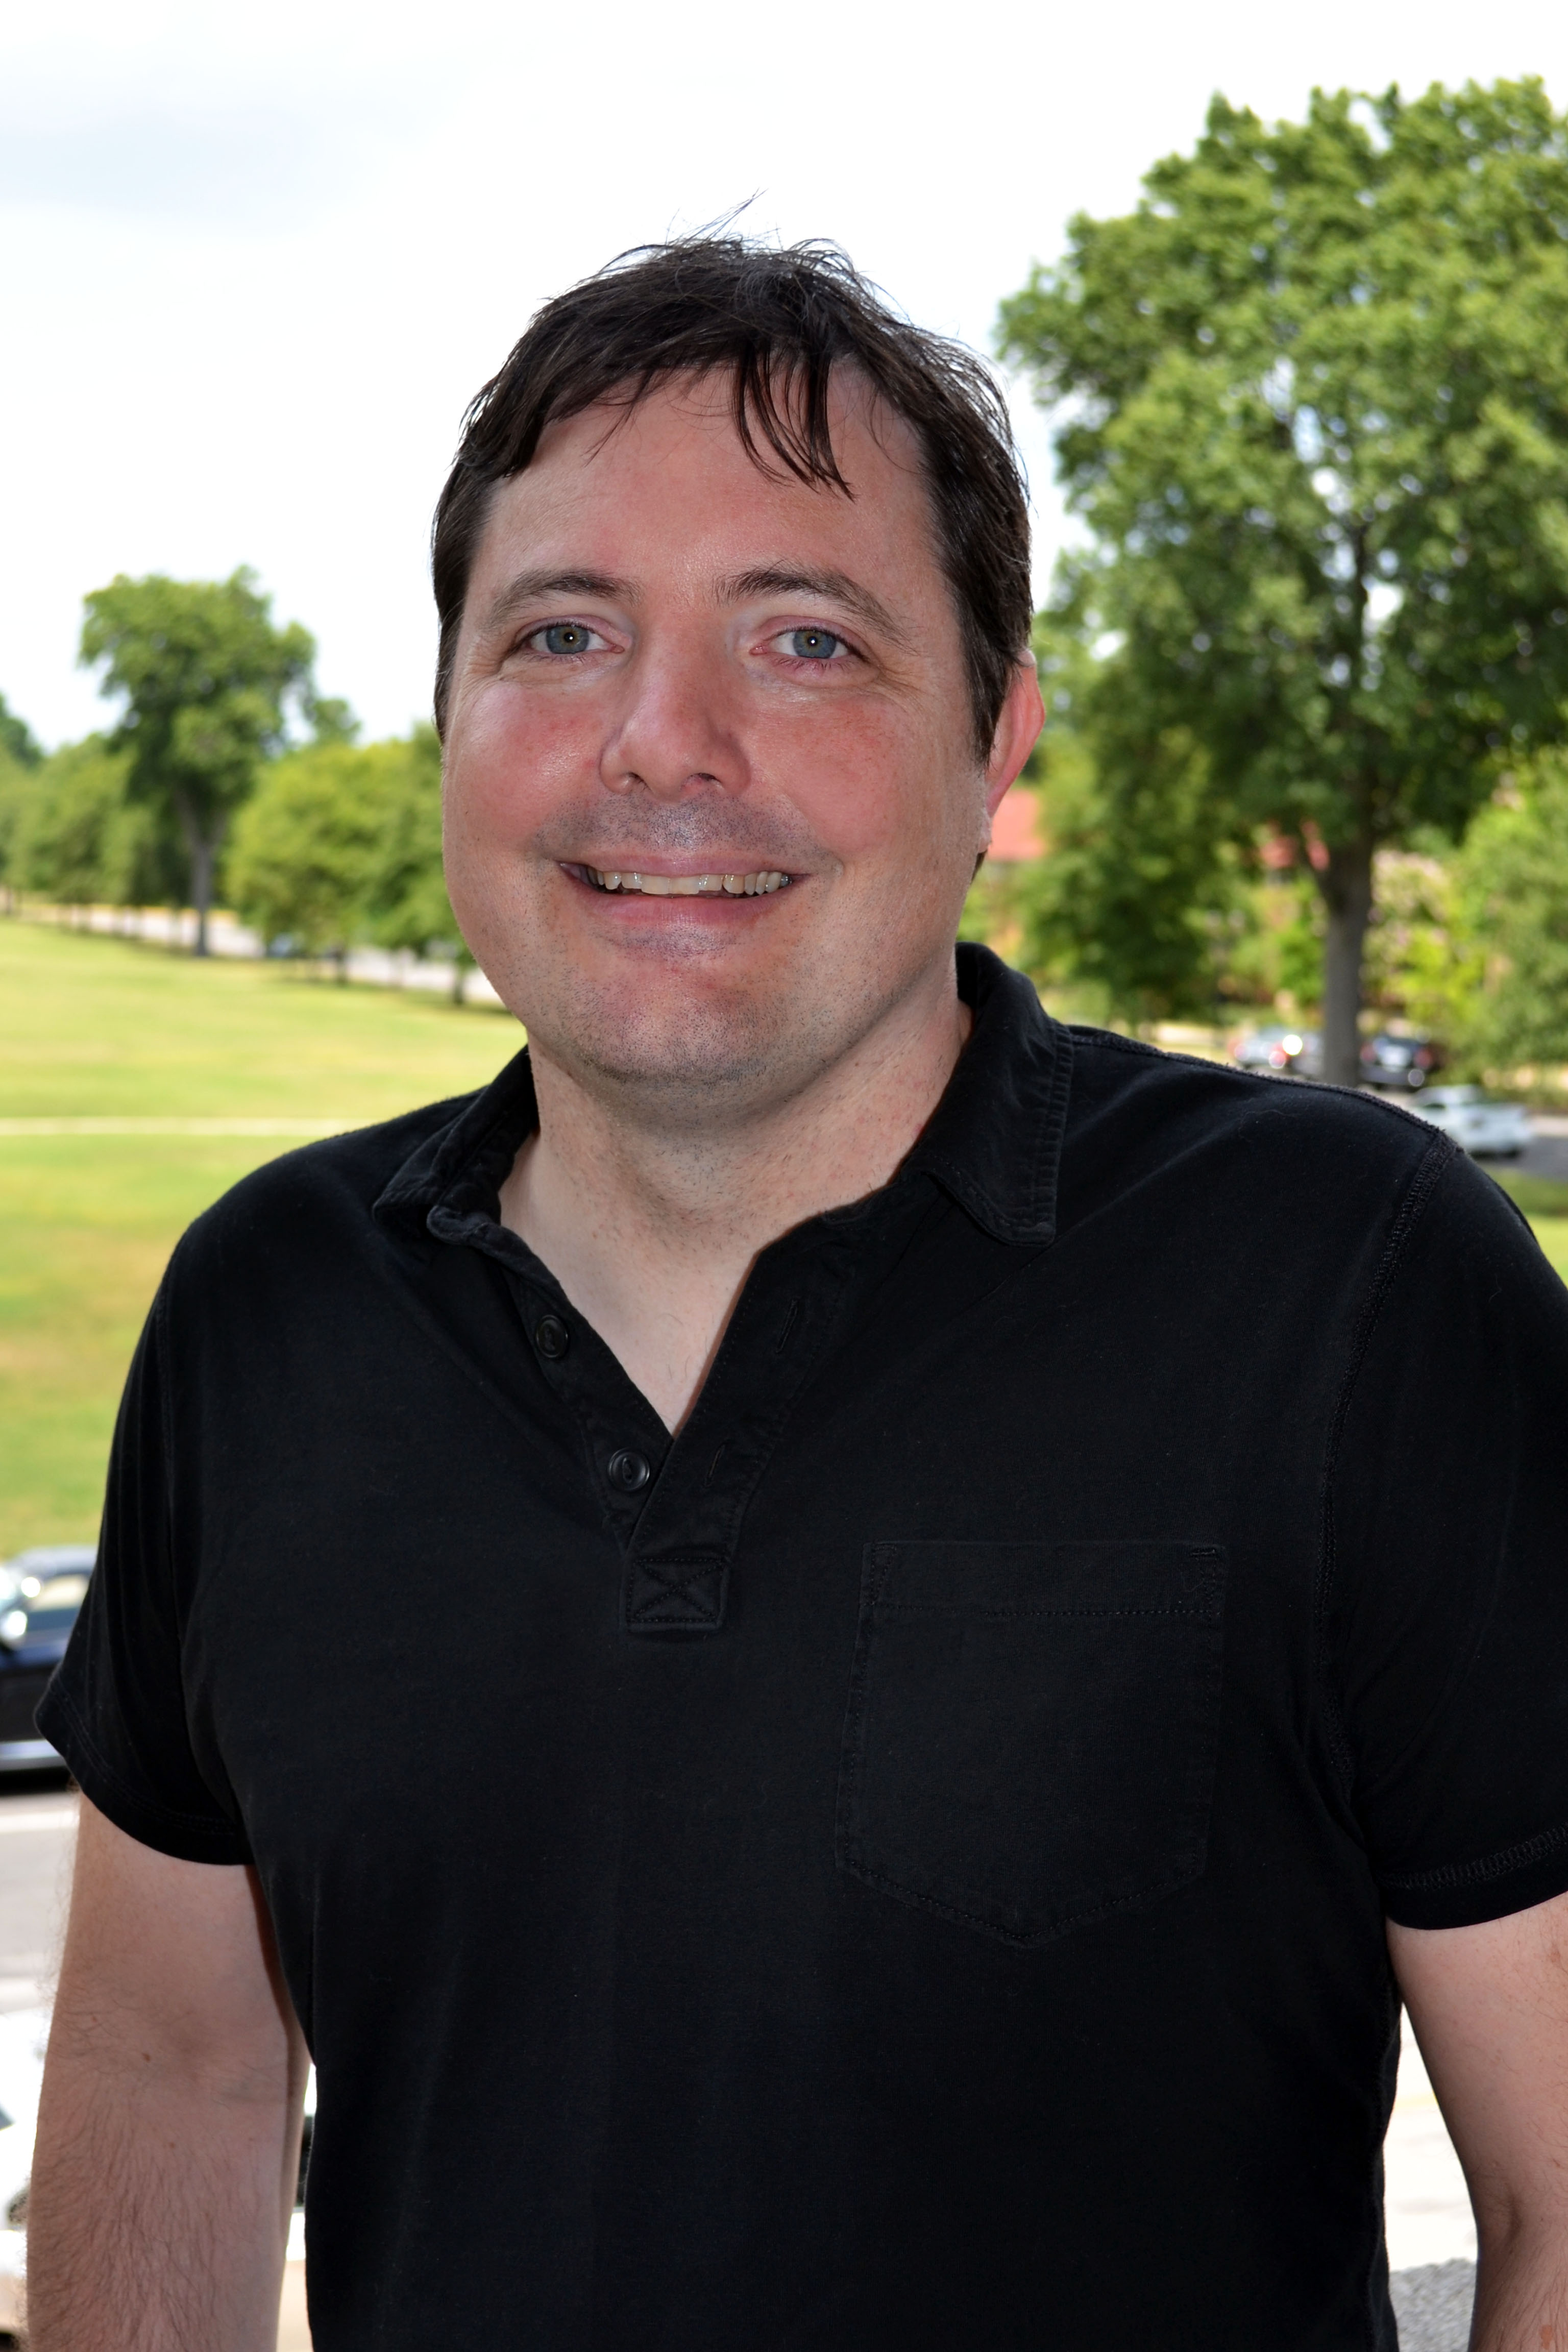 PHOTO:   Delta State University Assistant Professor, Michael Smith was awarded the Literary Arts Fellowship grant for Creative Nonfiction by the Mississippi Arts Commission.